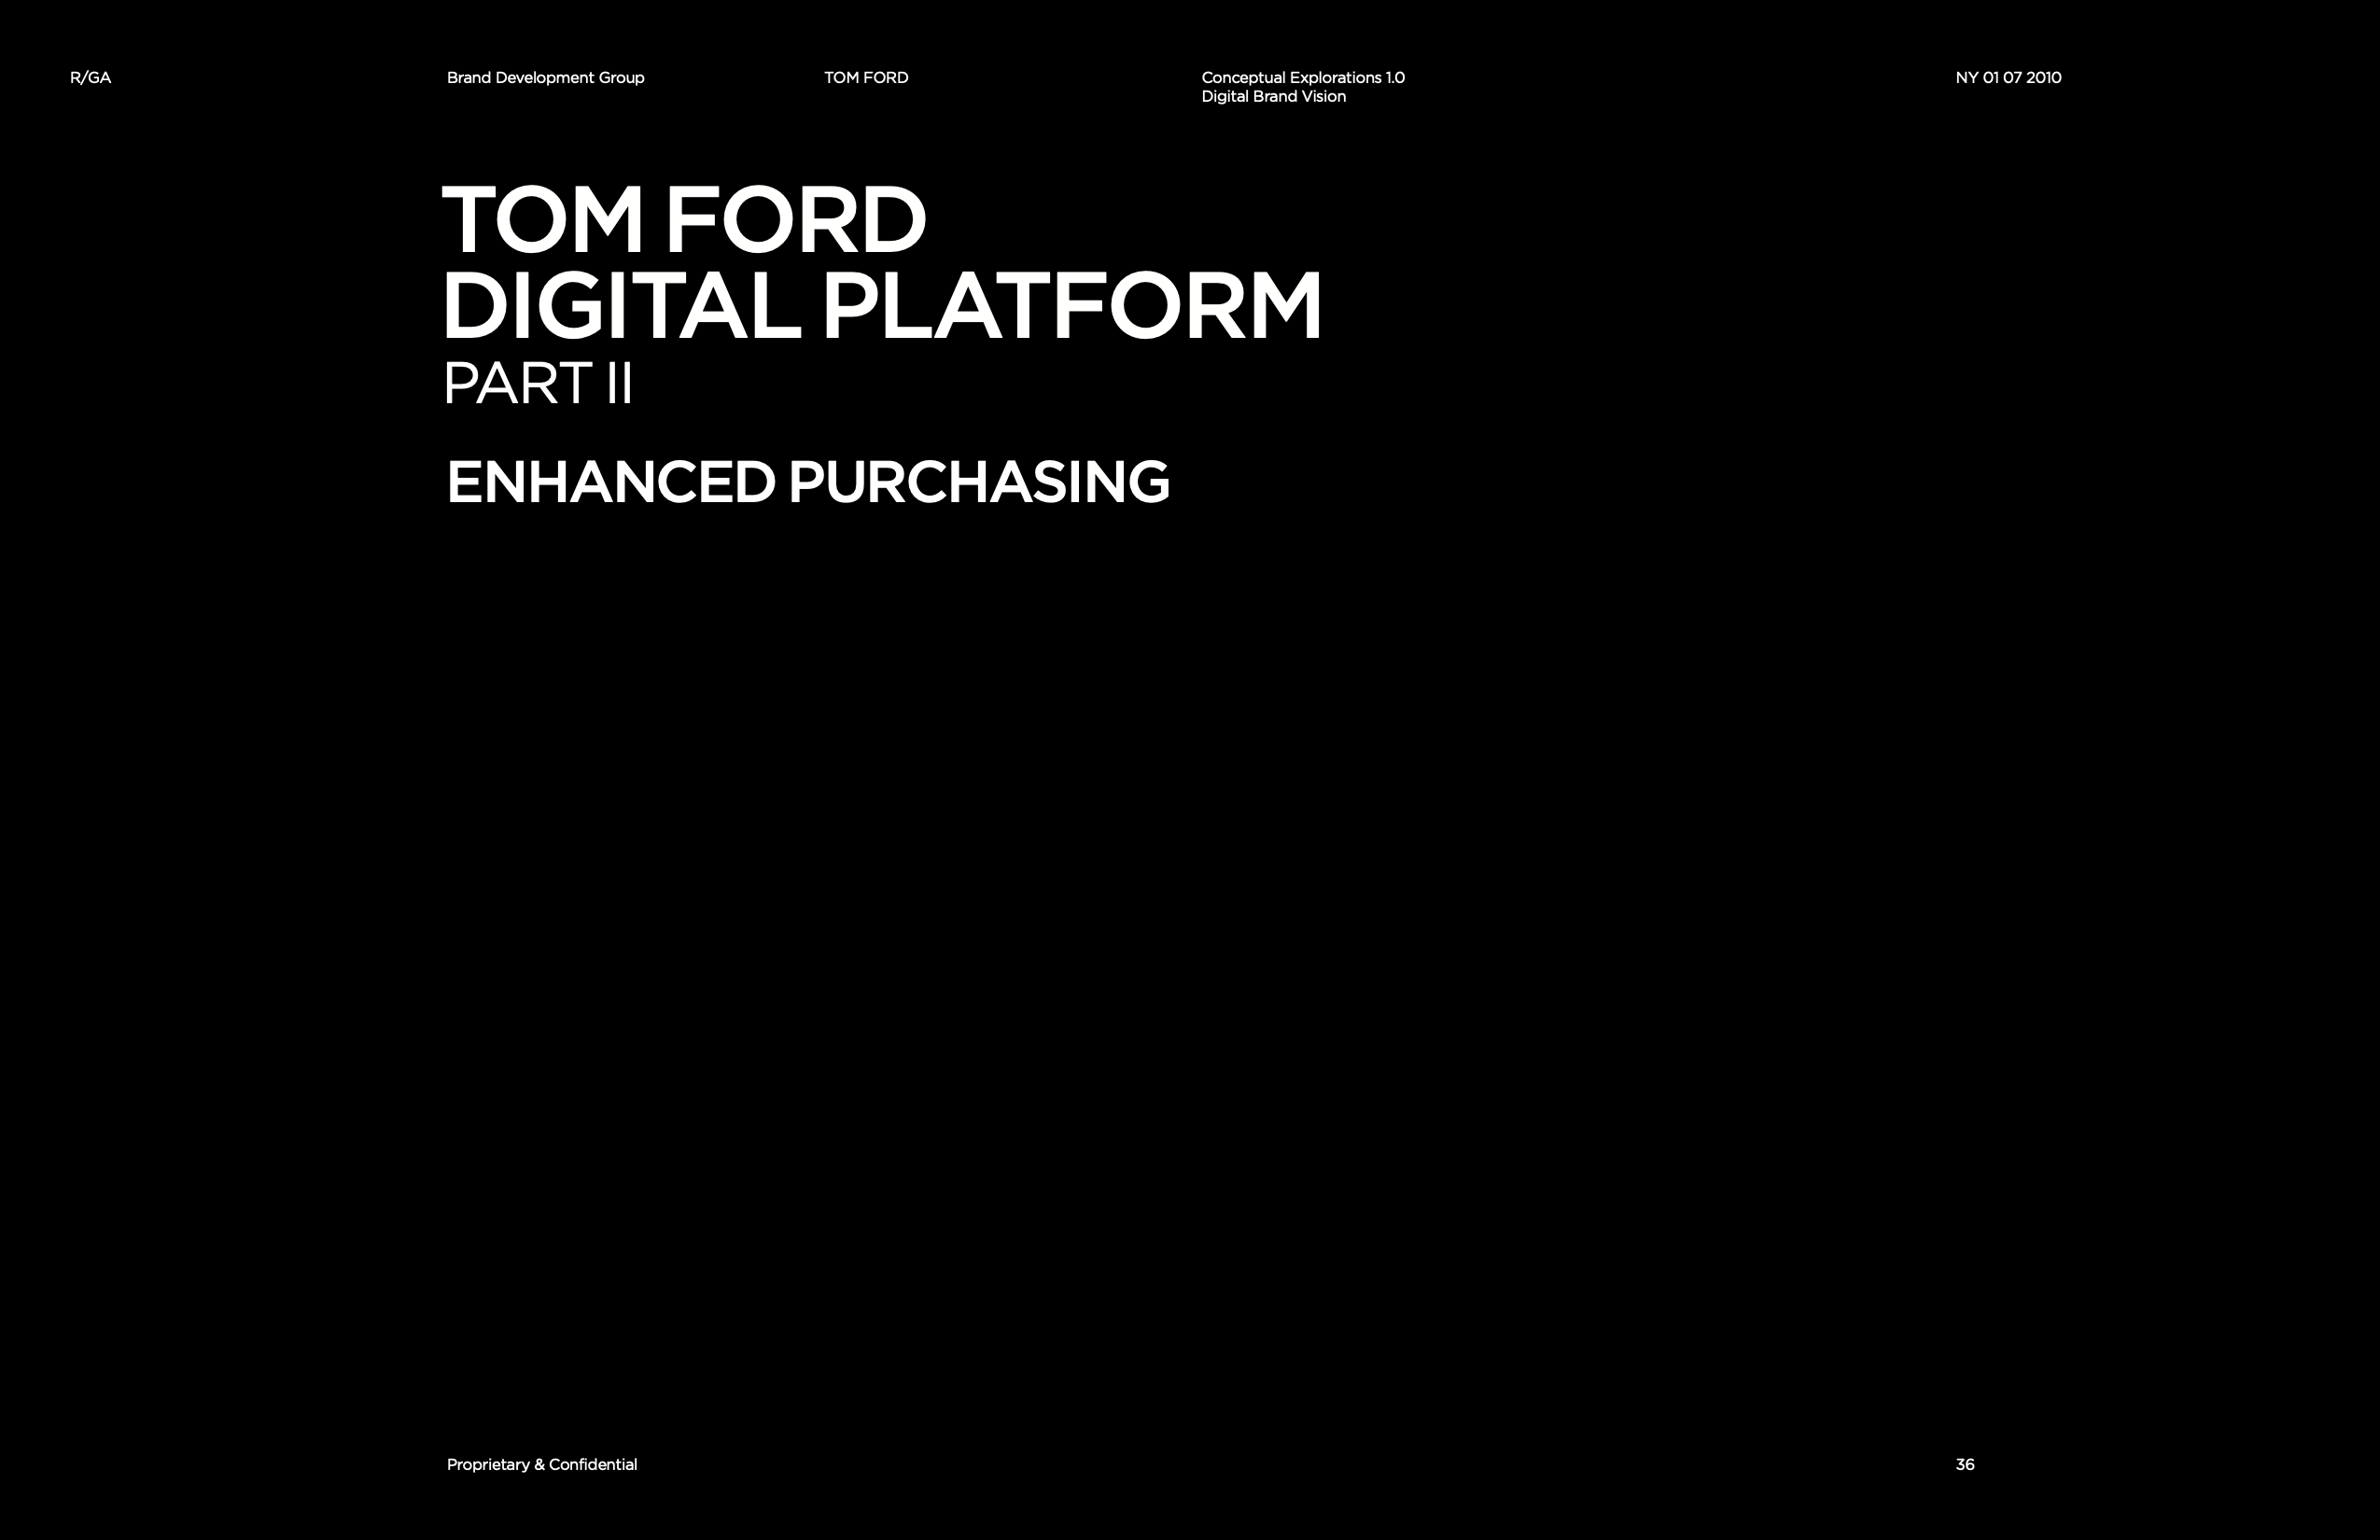 Tom Ford Brand Interface / Disclosure